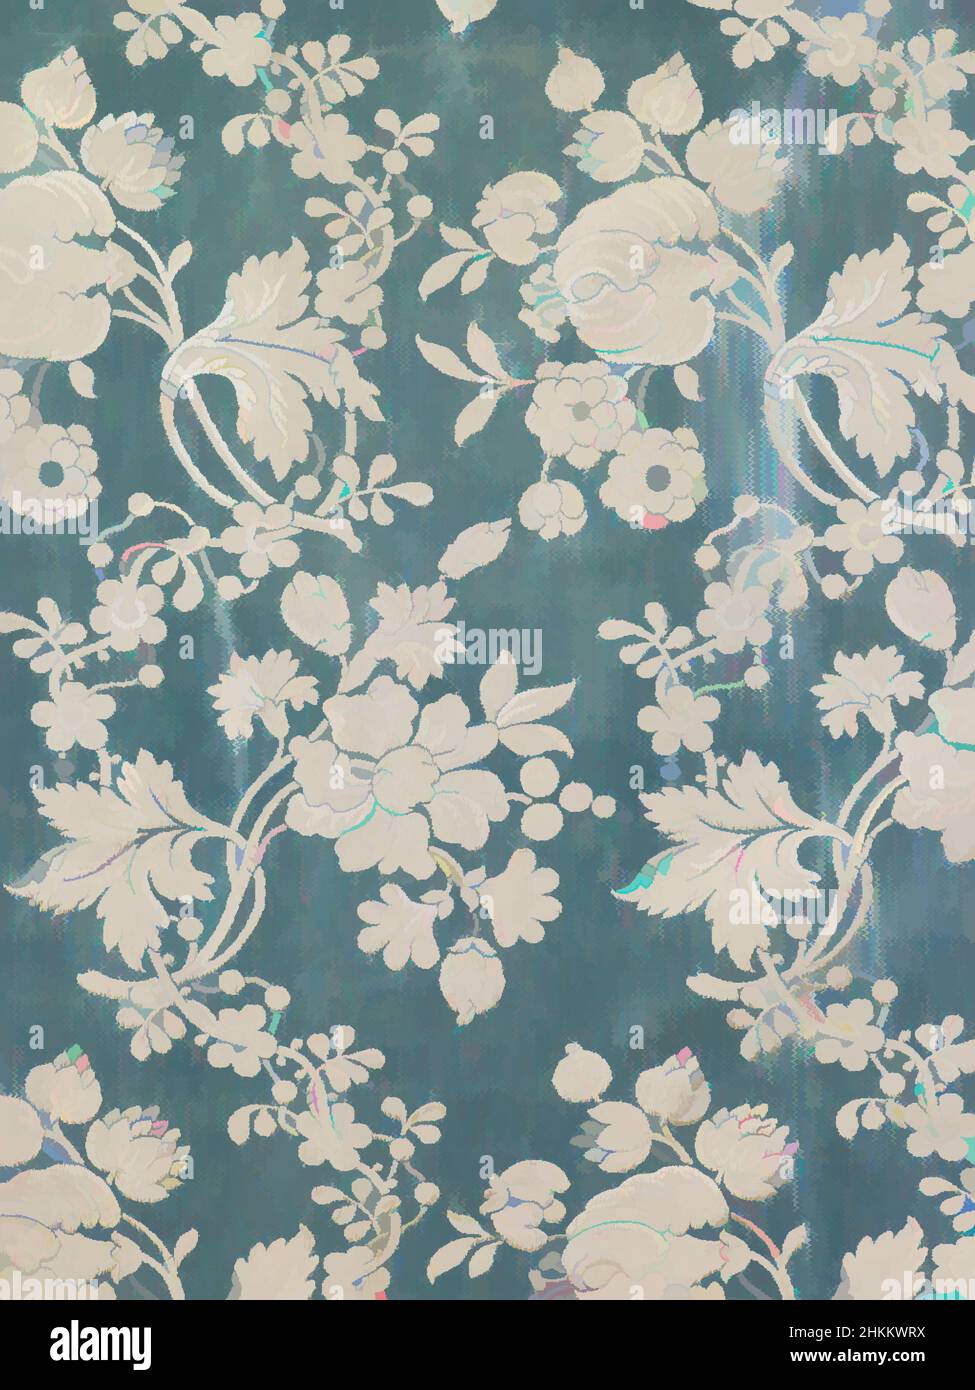 Art inspired by Textile, Anna Maria Garthwaite, English, 1688-1763, woven by John Sabatier, English, 1712-13-1780, 1752, Silk, Made in London, Greater London, England, Europe, Textiles, 19 × 35 in. (48.3 × 88.9 cm, Classic works modernized by Artotop with a splash of modernity. Shapes, color and value, eye-catching visual impact on art. Emotions through freedom of artworks in a contemporary way. A timeless message pursuing a wildly creative new direction. Artists turning to the digital medium and creating the Artotop NFT Stock Photo